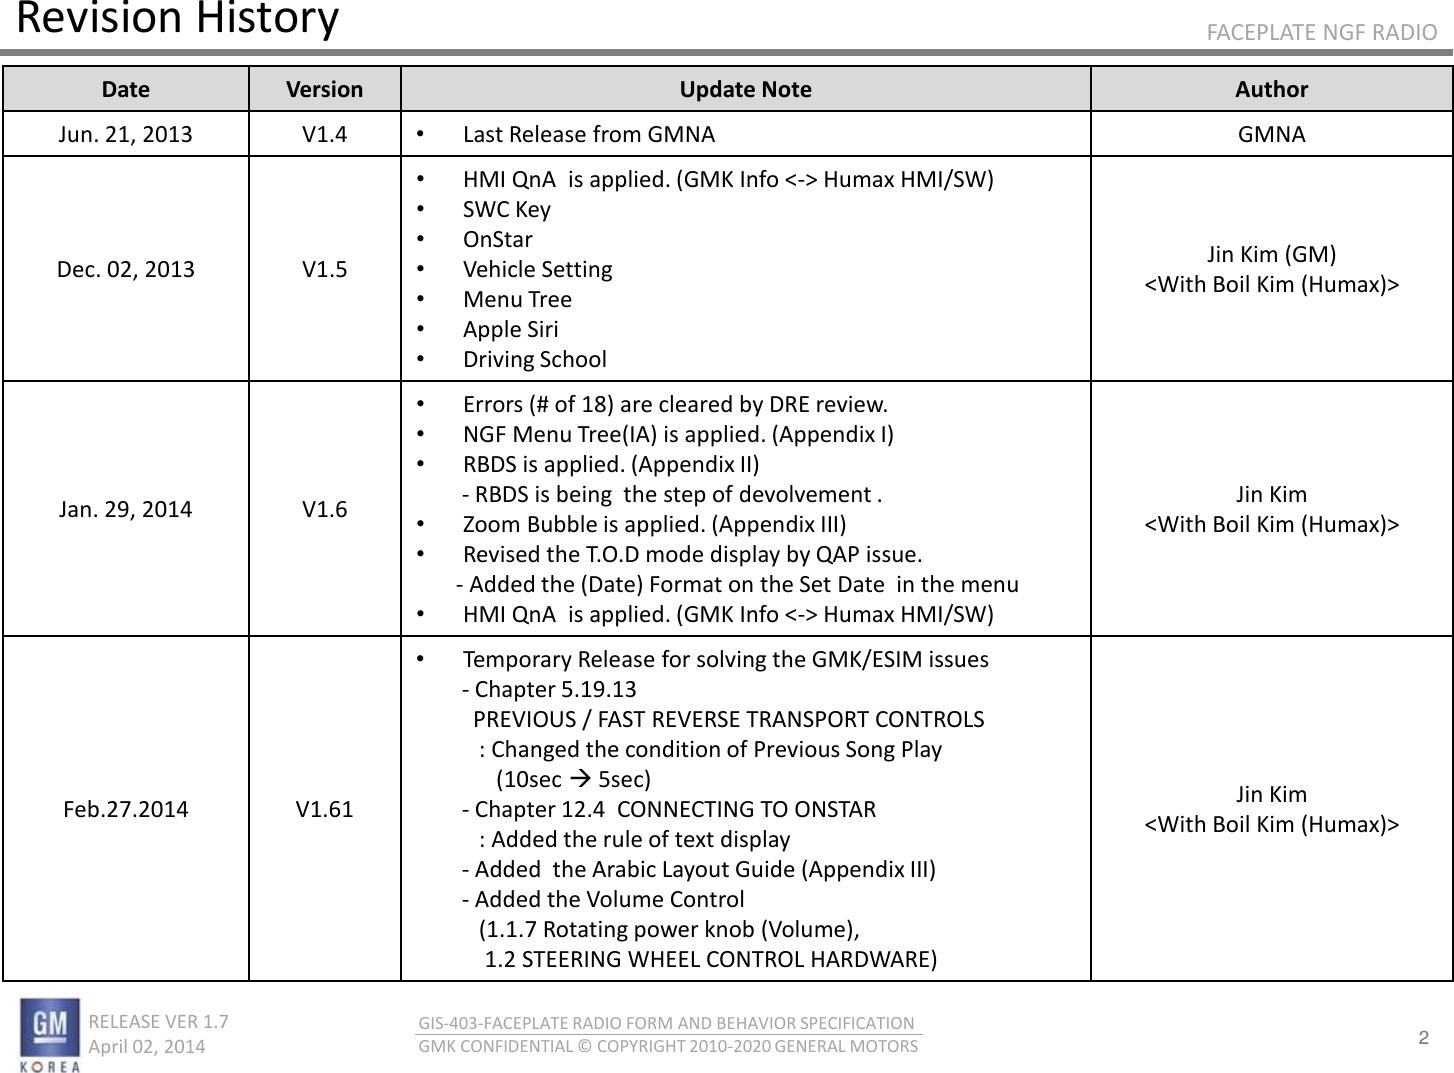 2 RELEASE VER 1.7                          April 02, 2014 GIS-403-FACEPLATE RADIO FORM AND BEHAVIOR SPECIFICATION GMK CONFIDENTIAL © COPYRIGHT 2010-2020 GENERAL MOTORS FACEPLATE NGF RADIO Revision History Date  Version  Update Note  Author Jun. 21, 2013  V1.4  •Last Release from GMNA  GMNA Dec. 02, 2013  V1.5 •HMI QnA  is applied. (GMK Info &lt;-&gt; Humax HMI/SW) •SWC Key  •OnStar •Vehicle Setting  •Menu Tree •Apple Siri •Driving School Jin Kim (GM) &lt;With Boil Kim (Humax)&gt; Jan. 29, 2014  V1.6 •Errors (# of 18) are cleared by DRE review.  •NGF Menu Tree(IA) is applied. (Appendix I) •RBDS is applied. (Appendix II)         - RBDS is being  the step of devolvement . •Zoom Bubble is applied. (Appendix III) •Revised the T.O.D mode display by QAP issue.        - Added the (Date) Format on the Set Date  in the menu •HMI QnA  is applied. (GMK Info &lt;-&gt; Humax HMI/SW)  Jin Kim &lt;With Boil Kim (Humax)&gt; Feb.27.2014  V1.61 •Temporary Release for solving the GMK/ESIM issues         - Chapter 5.19.13            PREVIOUS / FAST REVERSE TRANSPORT CONTROLS            : Changed the condition of Previous Song Play               (10sec  5sec)         - Chapter 12.4  CONNECTING TO ONSTAR            : Added the rule of text display         - Added  the Arabic Layout Guide (Appendix III)         - Added the Volume Control            (1.1.7 Rotating power knob (Volume),              1.2 STEERING WHEEL CONTROL HARDWARE) Jin Kim &lt;With Boil Kim (Humax)&gt; 